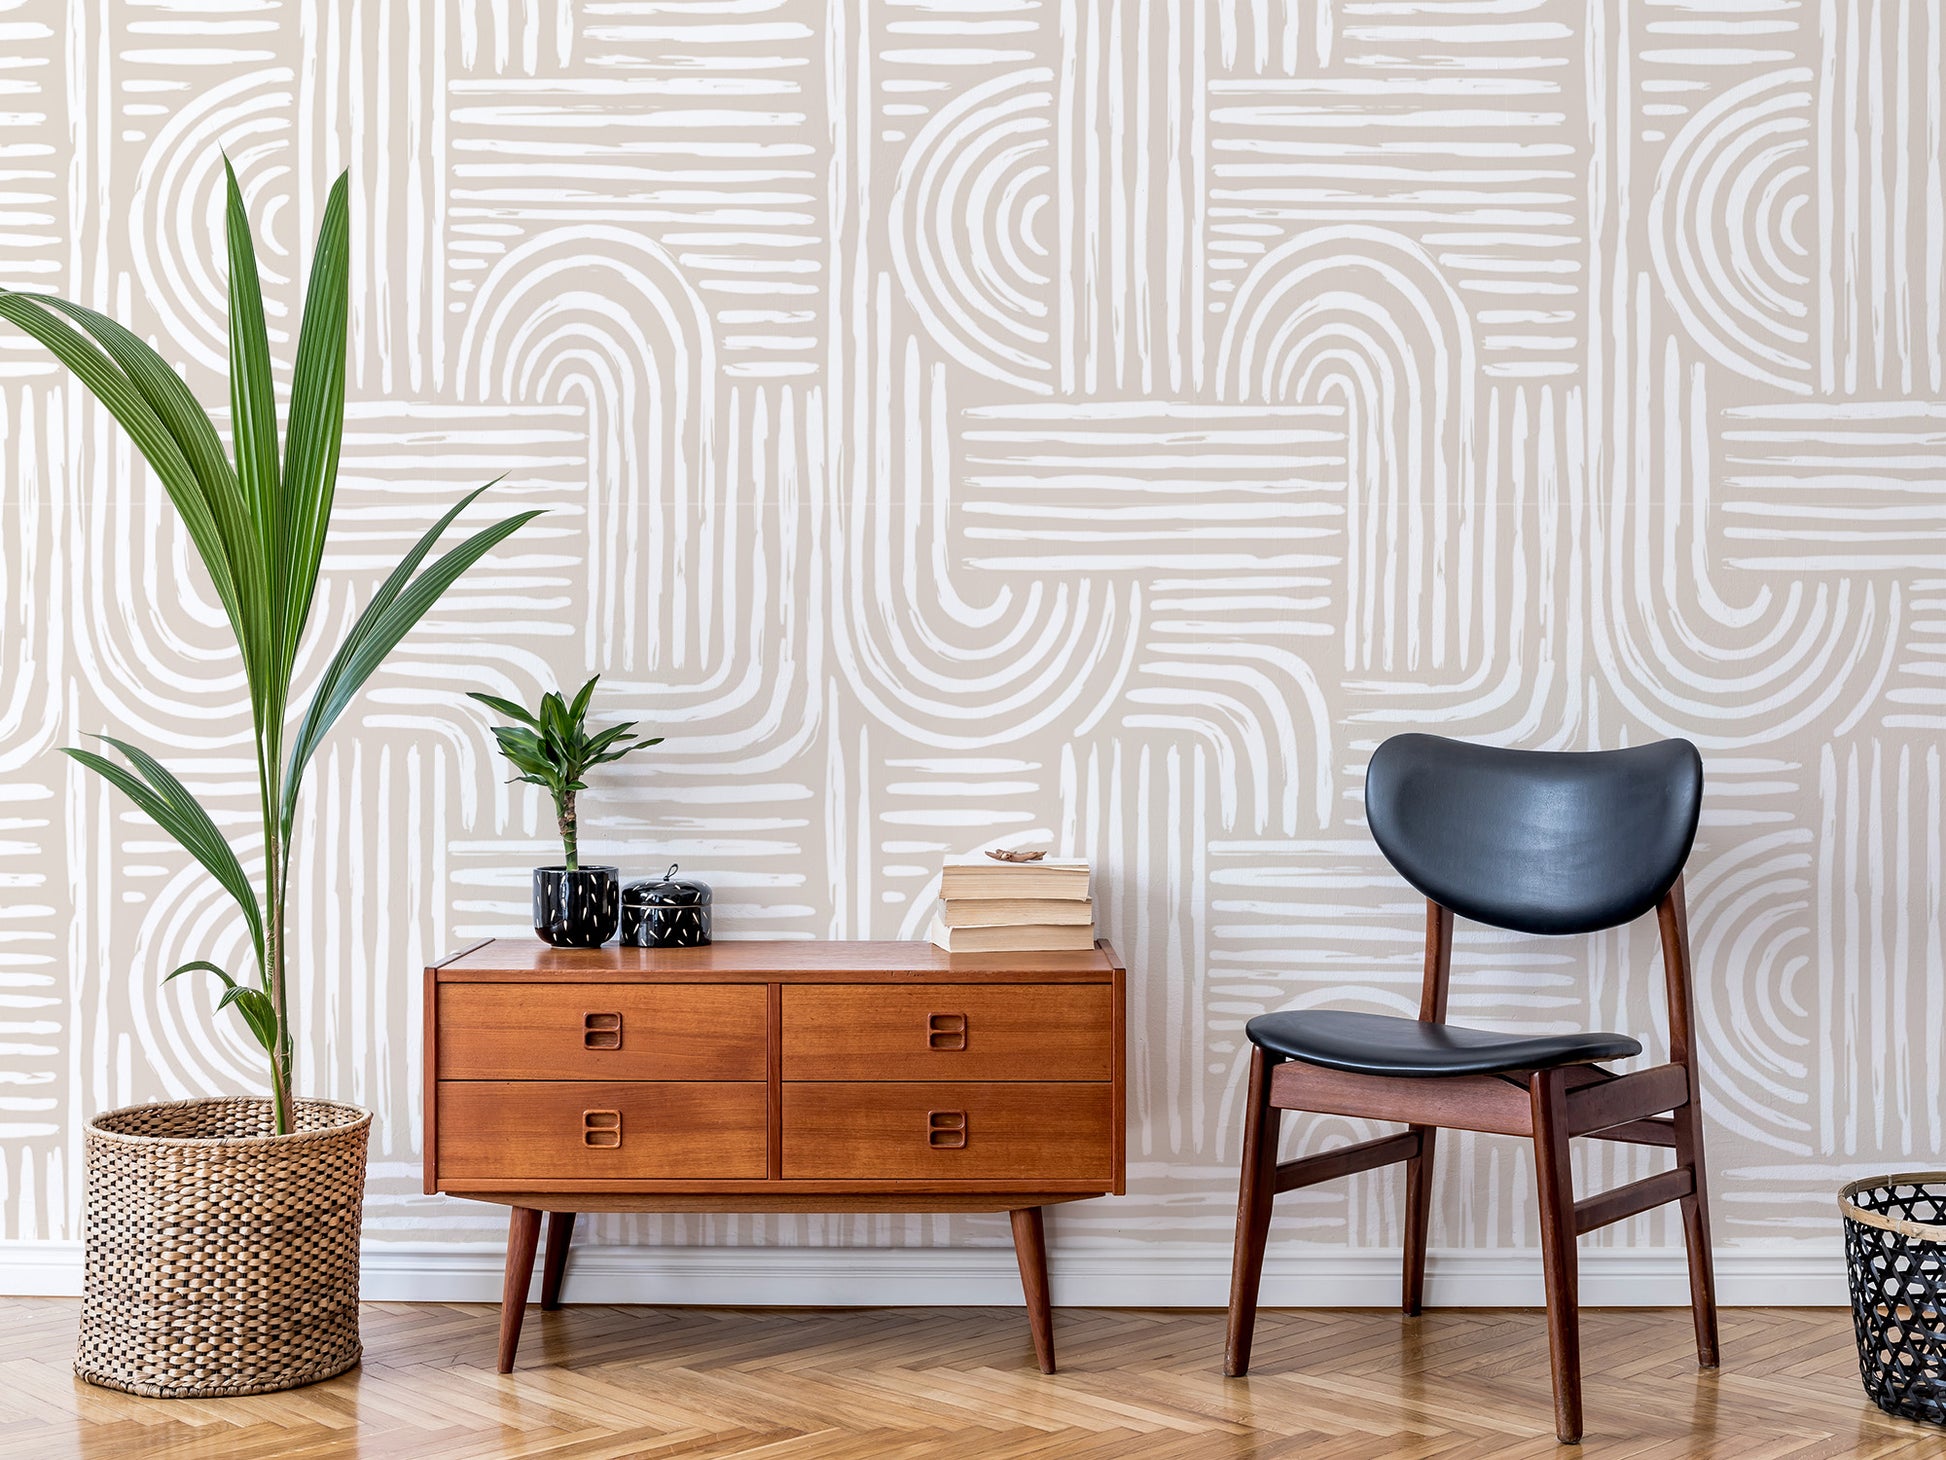 Beige and white abstract modern removable peel and stick wallpaper in a mid century living room.